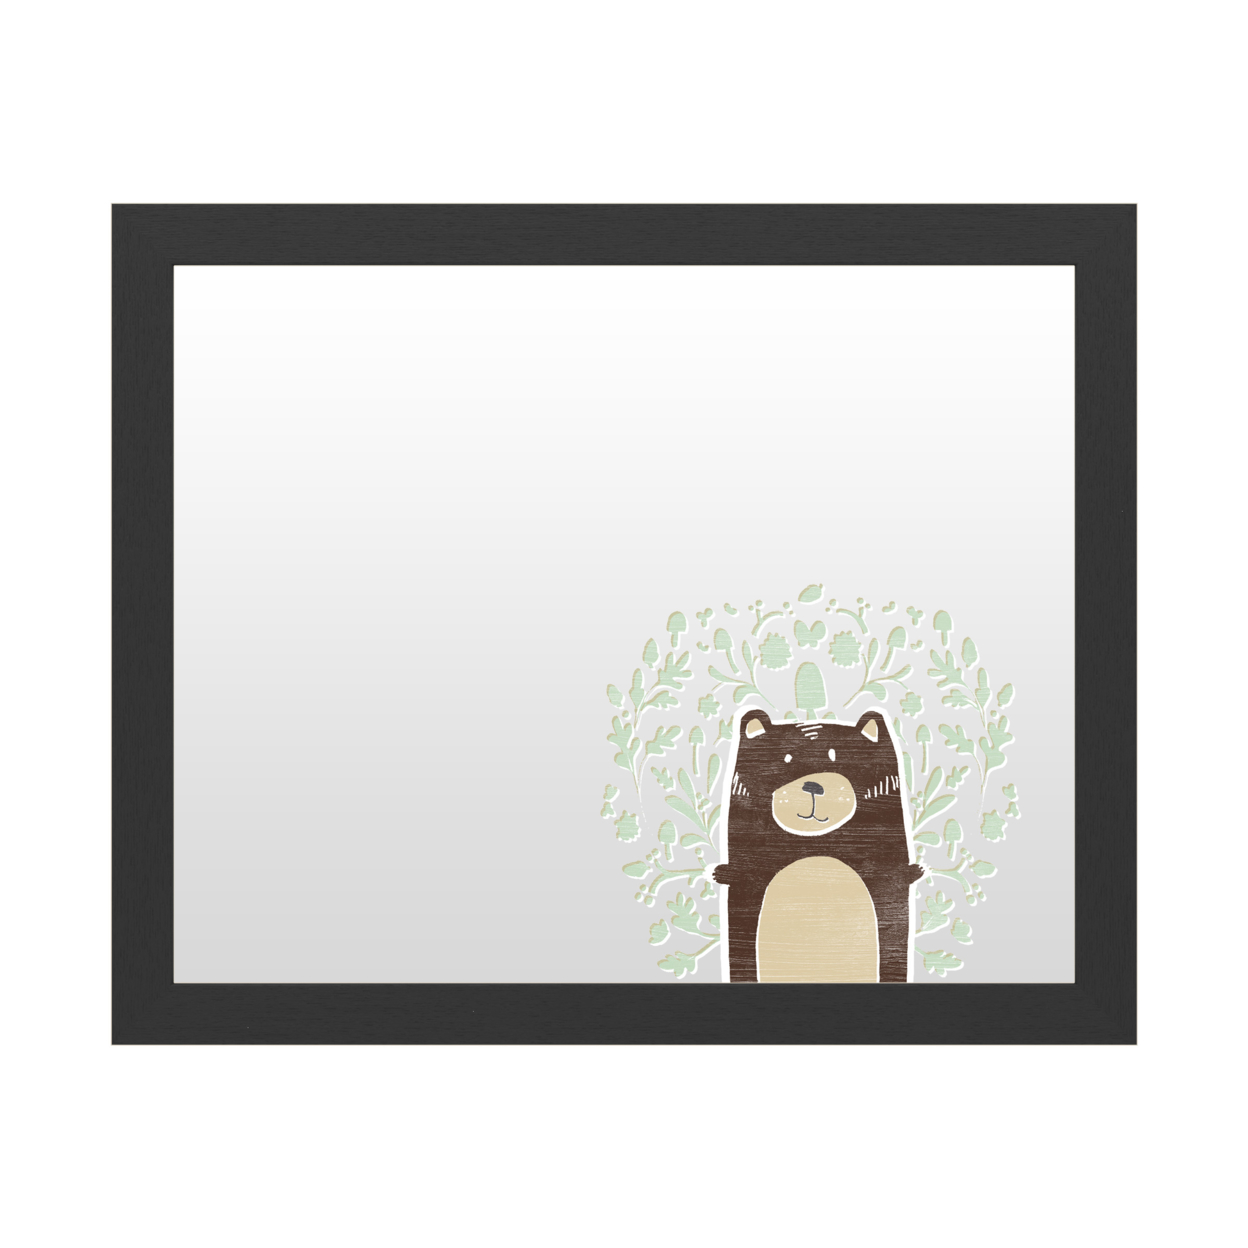 Dry Erase 16 X 20 Marker Board With Printed Artwork - June Erica Vess Woodland Cutie I White Board - Ready To Hang